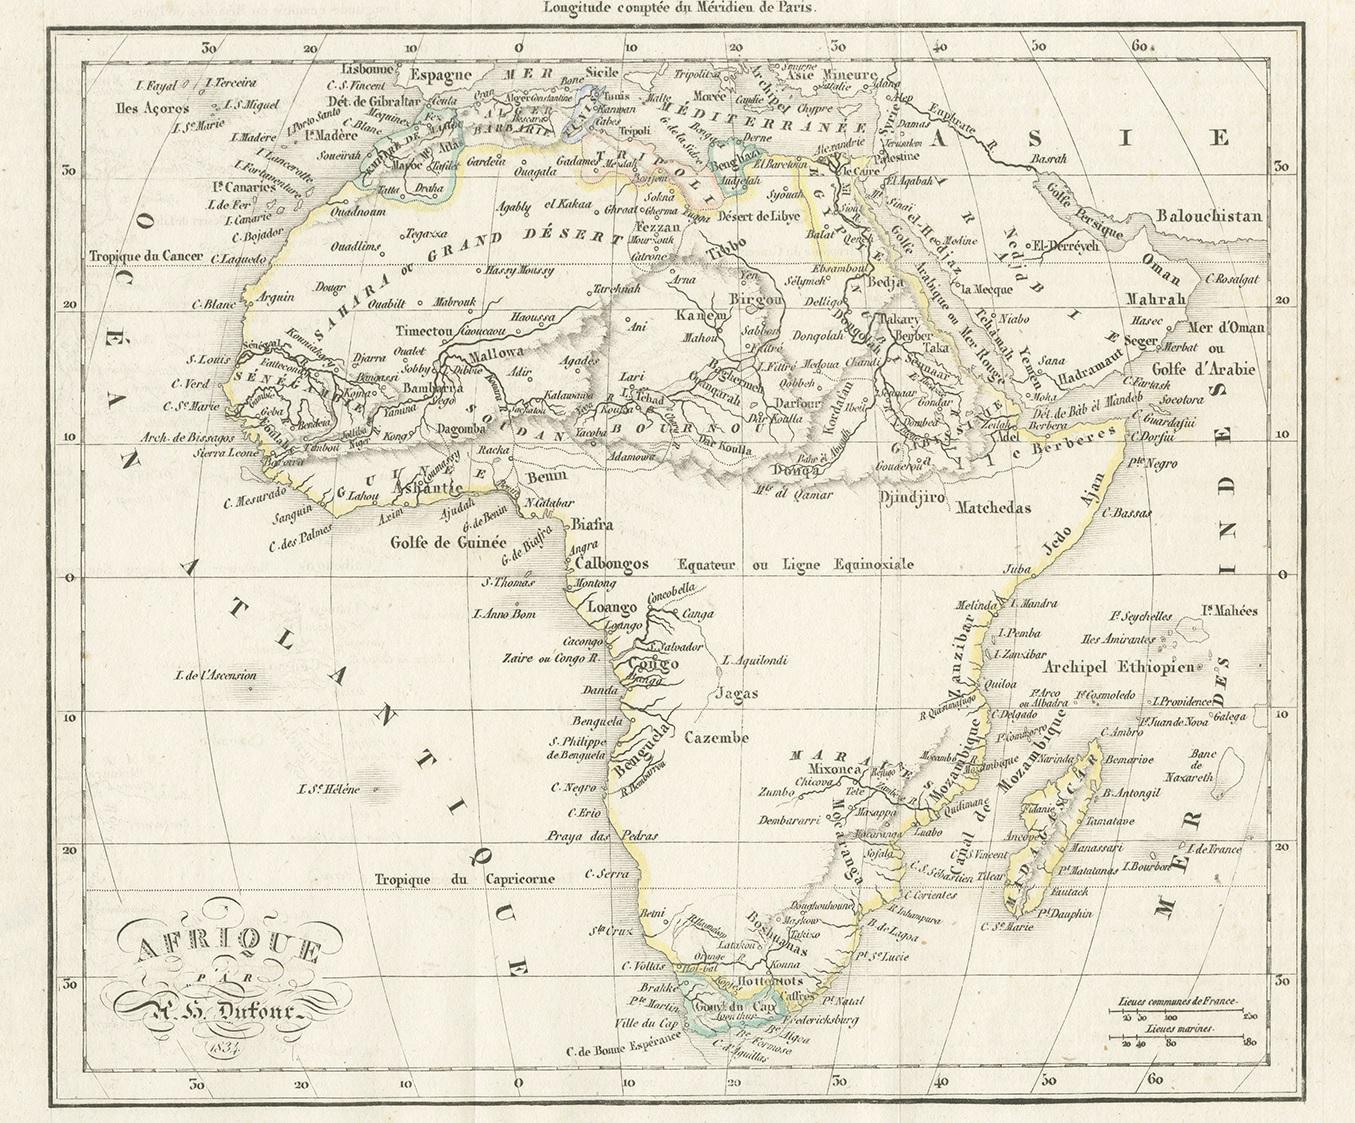 Antique map titled 'Afrique'. Uncommon map of Africa. Published by or after A.H. Dufour, circa 1834. Source unknown, to be determined.